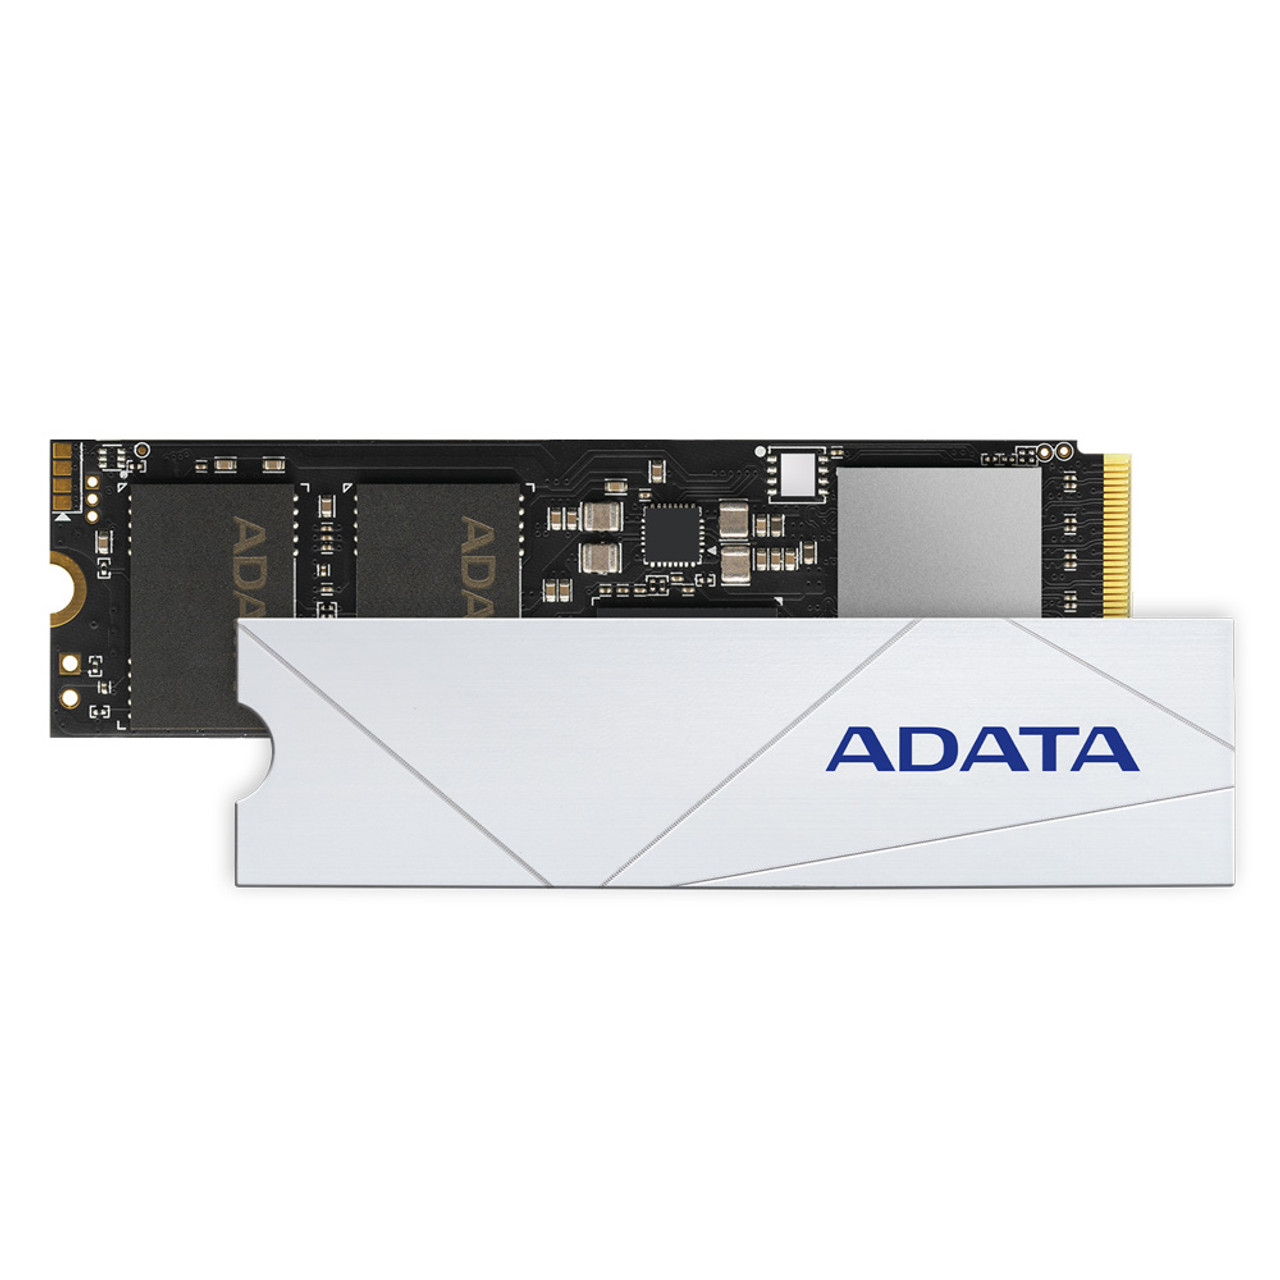 ADATA PREMIUM SSD FOR PS5 2TB PCIe Gen4 x4 M.2 2280 Internal Solid State  Drive | White SSD | Ideal for Gaming | PS5 Compatible - Innogrit IG5236 |  Up to 7400MBps - 1PK - ADATA